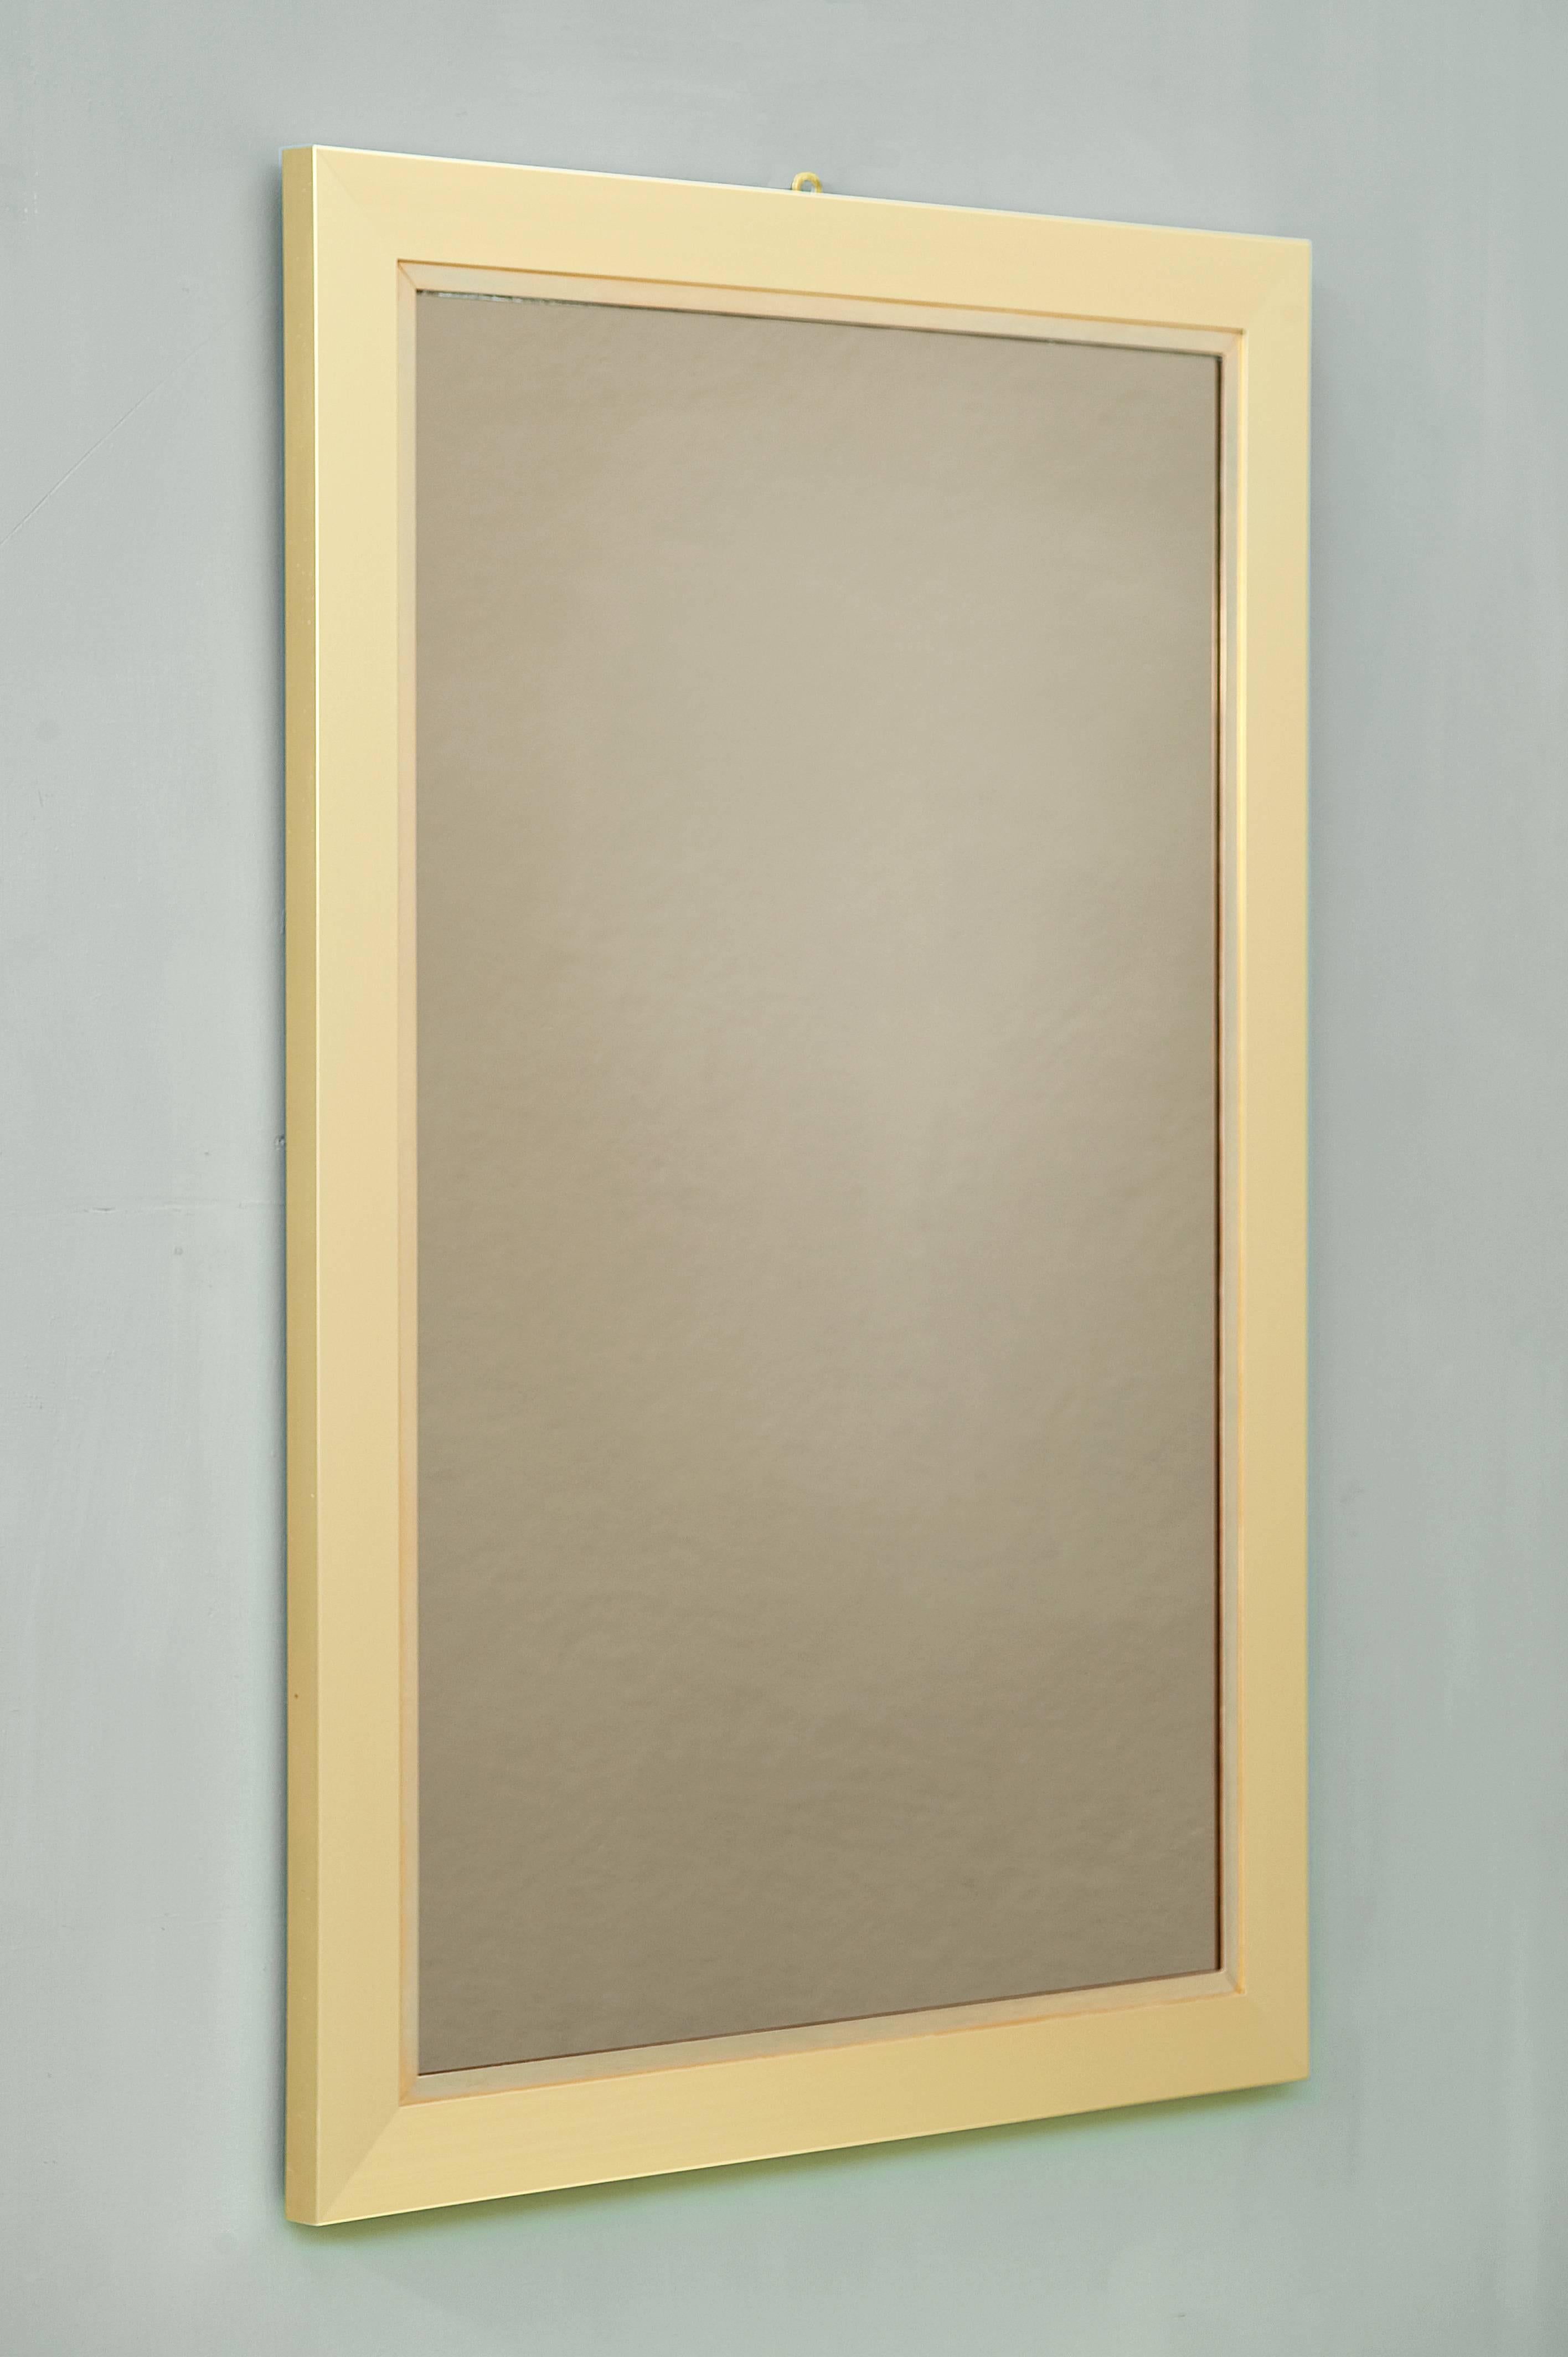 Elegant brass mirror signed by Willy Rizzo on the right up side.